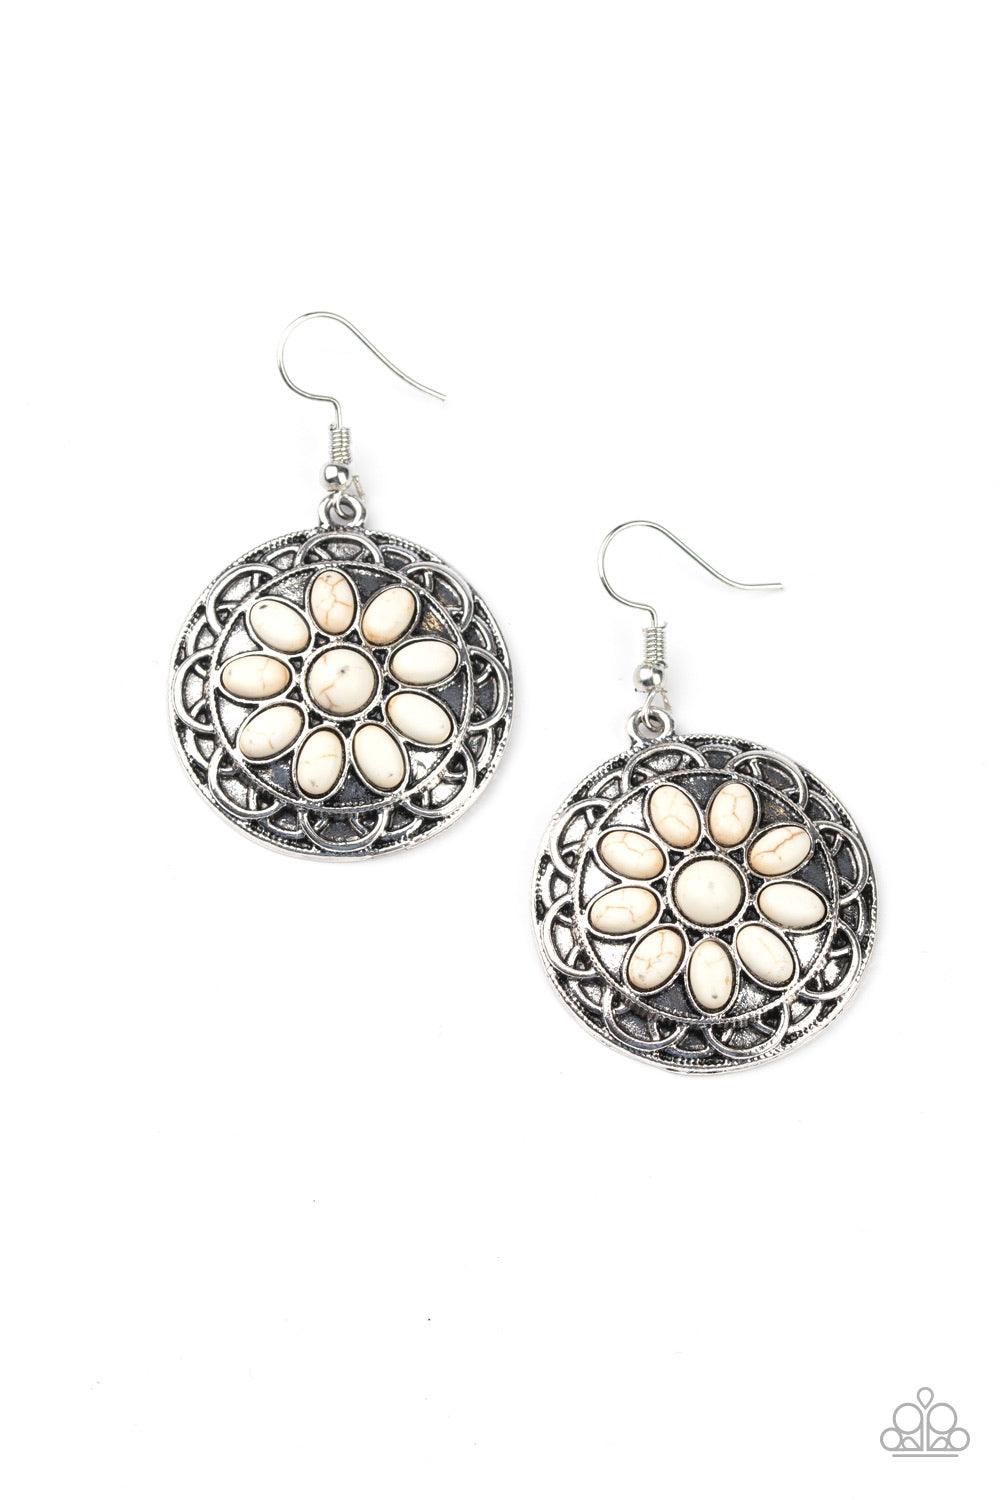 Paparazzi Accessories Mesa Oasis - White Refreshing white stones are pressed into the center of an ornate silver frame, creating a whimsical flower. Earring attaches to a standard fishhook fitting. Sold as one pair of earrings. Jewelry